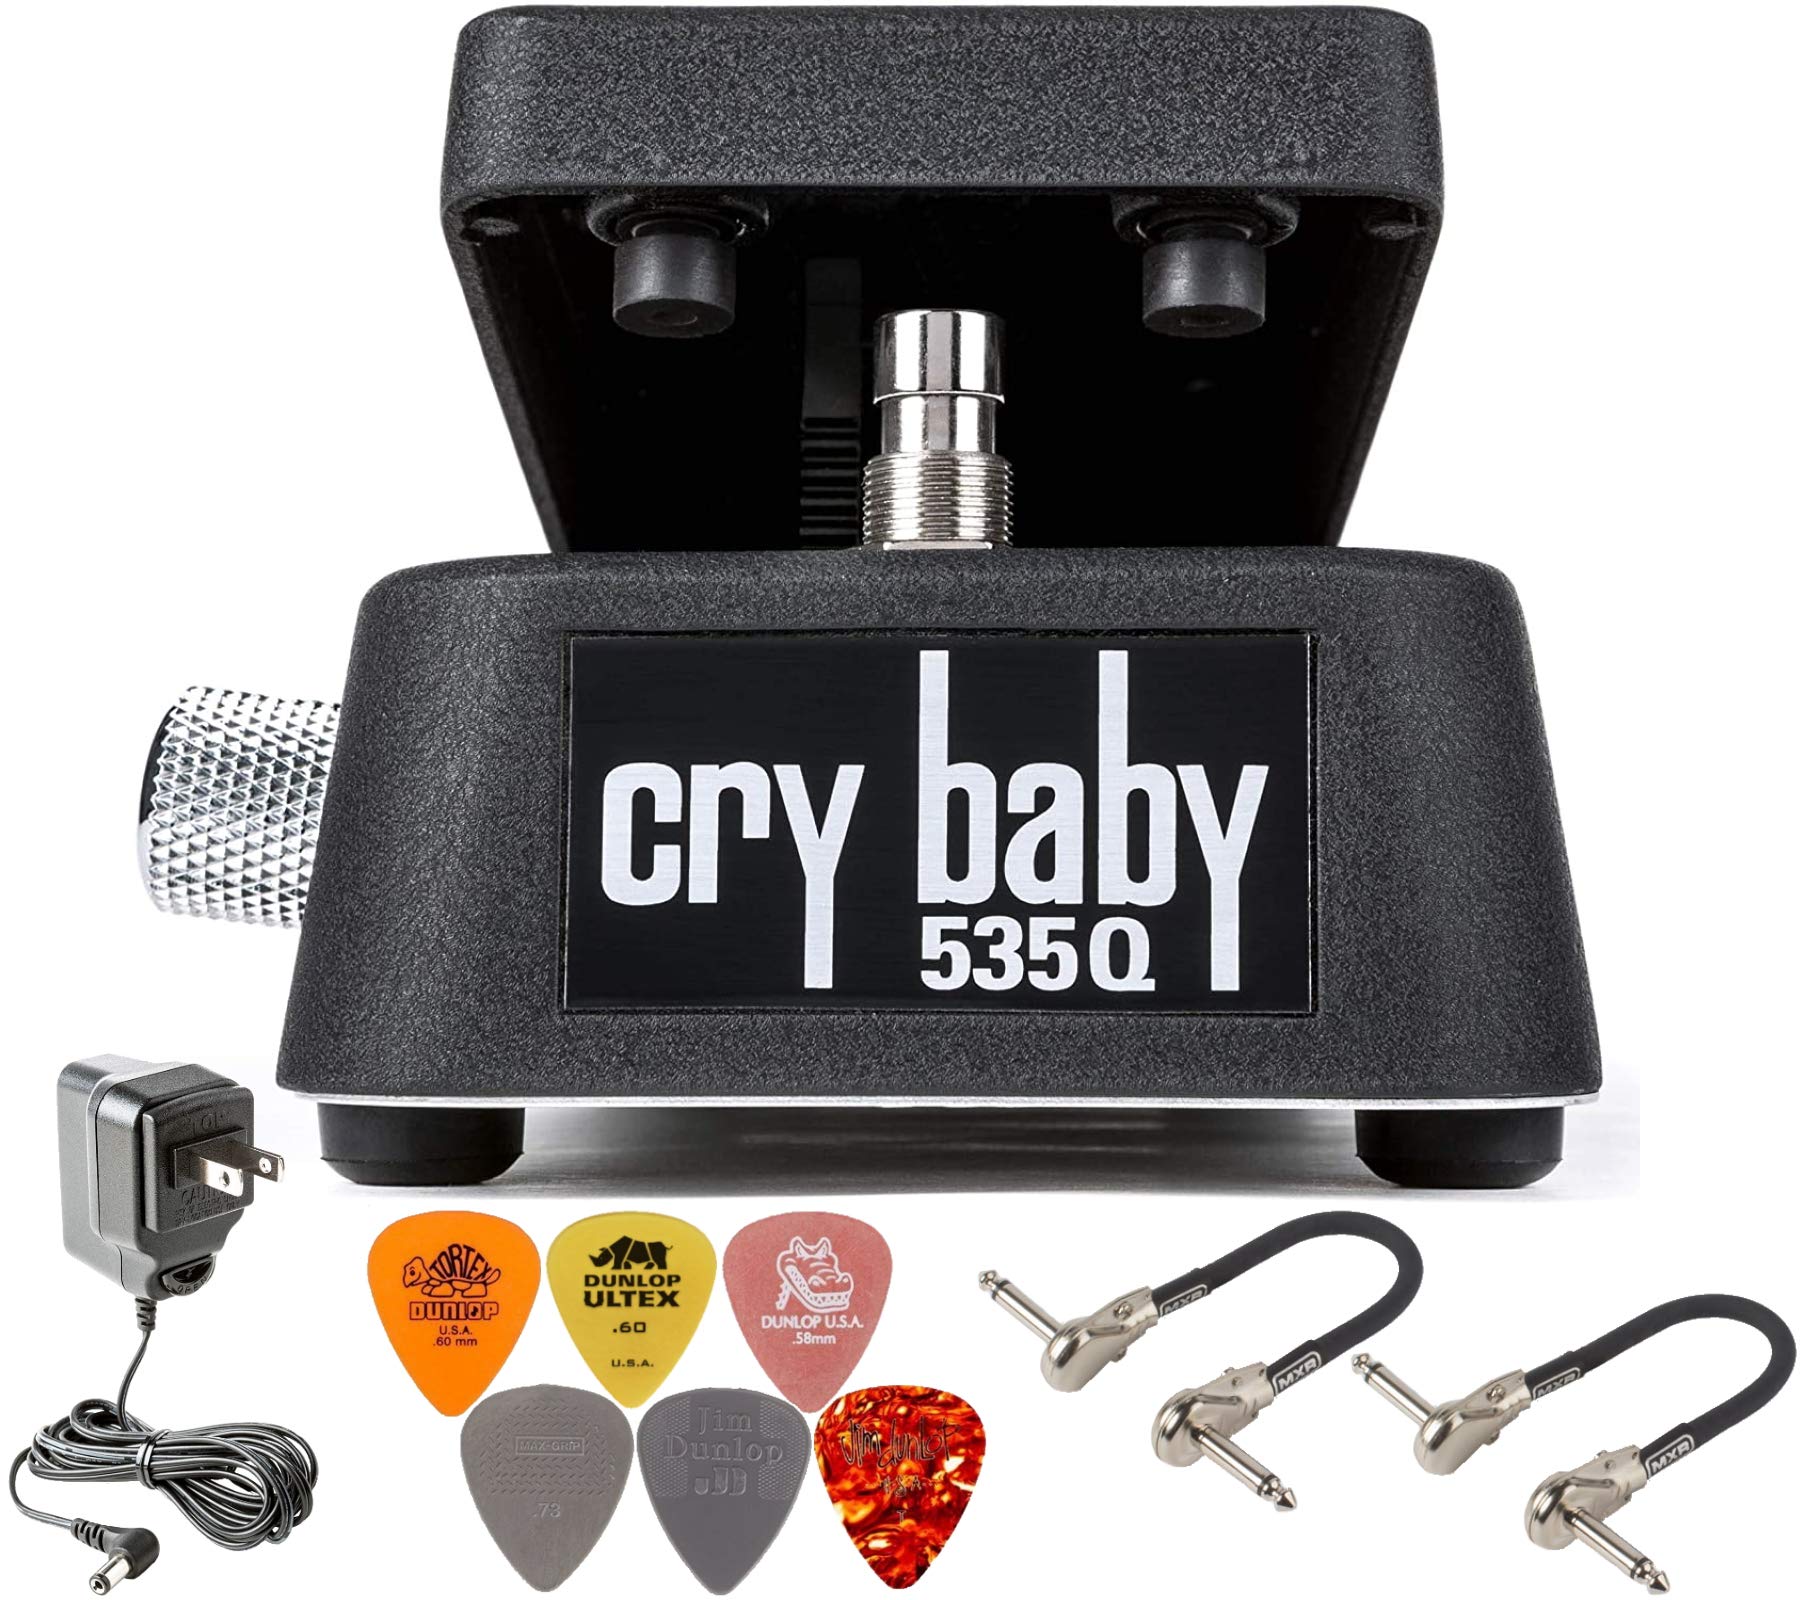 MXR Dunlop 535Q Cry Baby Multi-Wah Pedal Bundle with 2  Patch Cables, Dunlop ECB003 Power Supply, and 6 Assorted Dunlop Picks